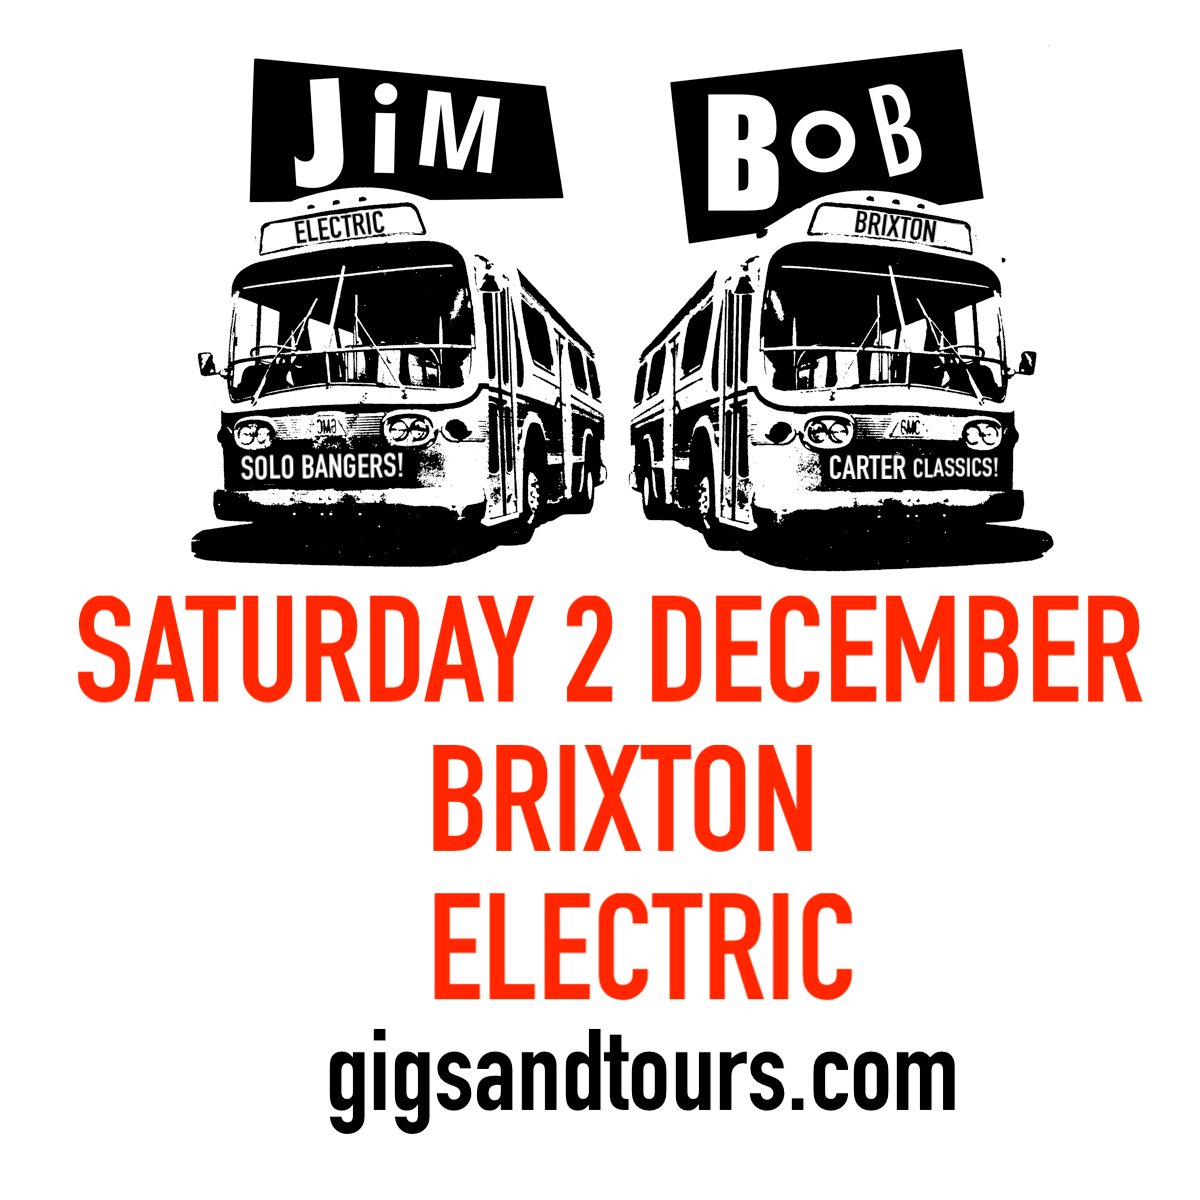 Jim Bob tickets selling fast for his only London date this year, don't miss out!